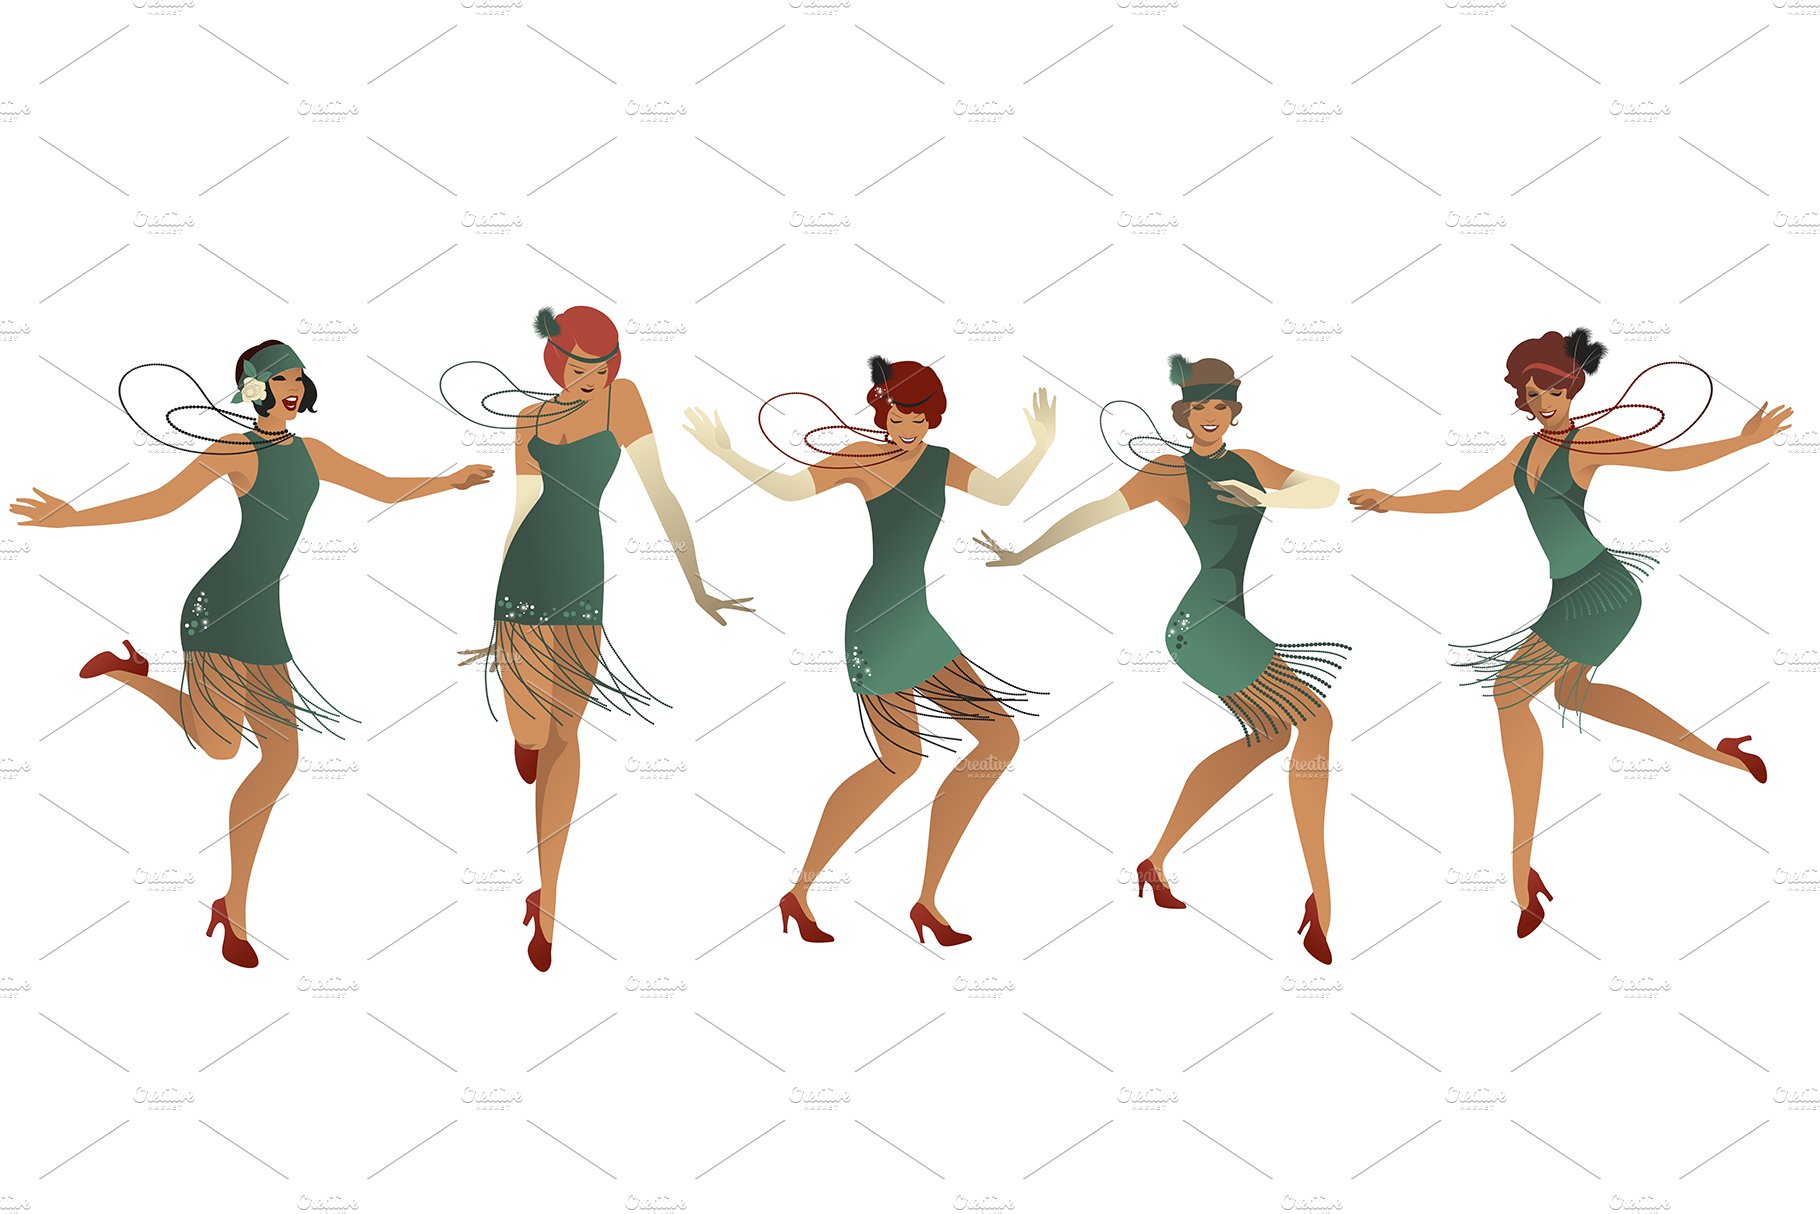 Five Flappers Dancing Charleston I cover image.